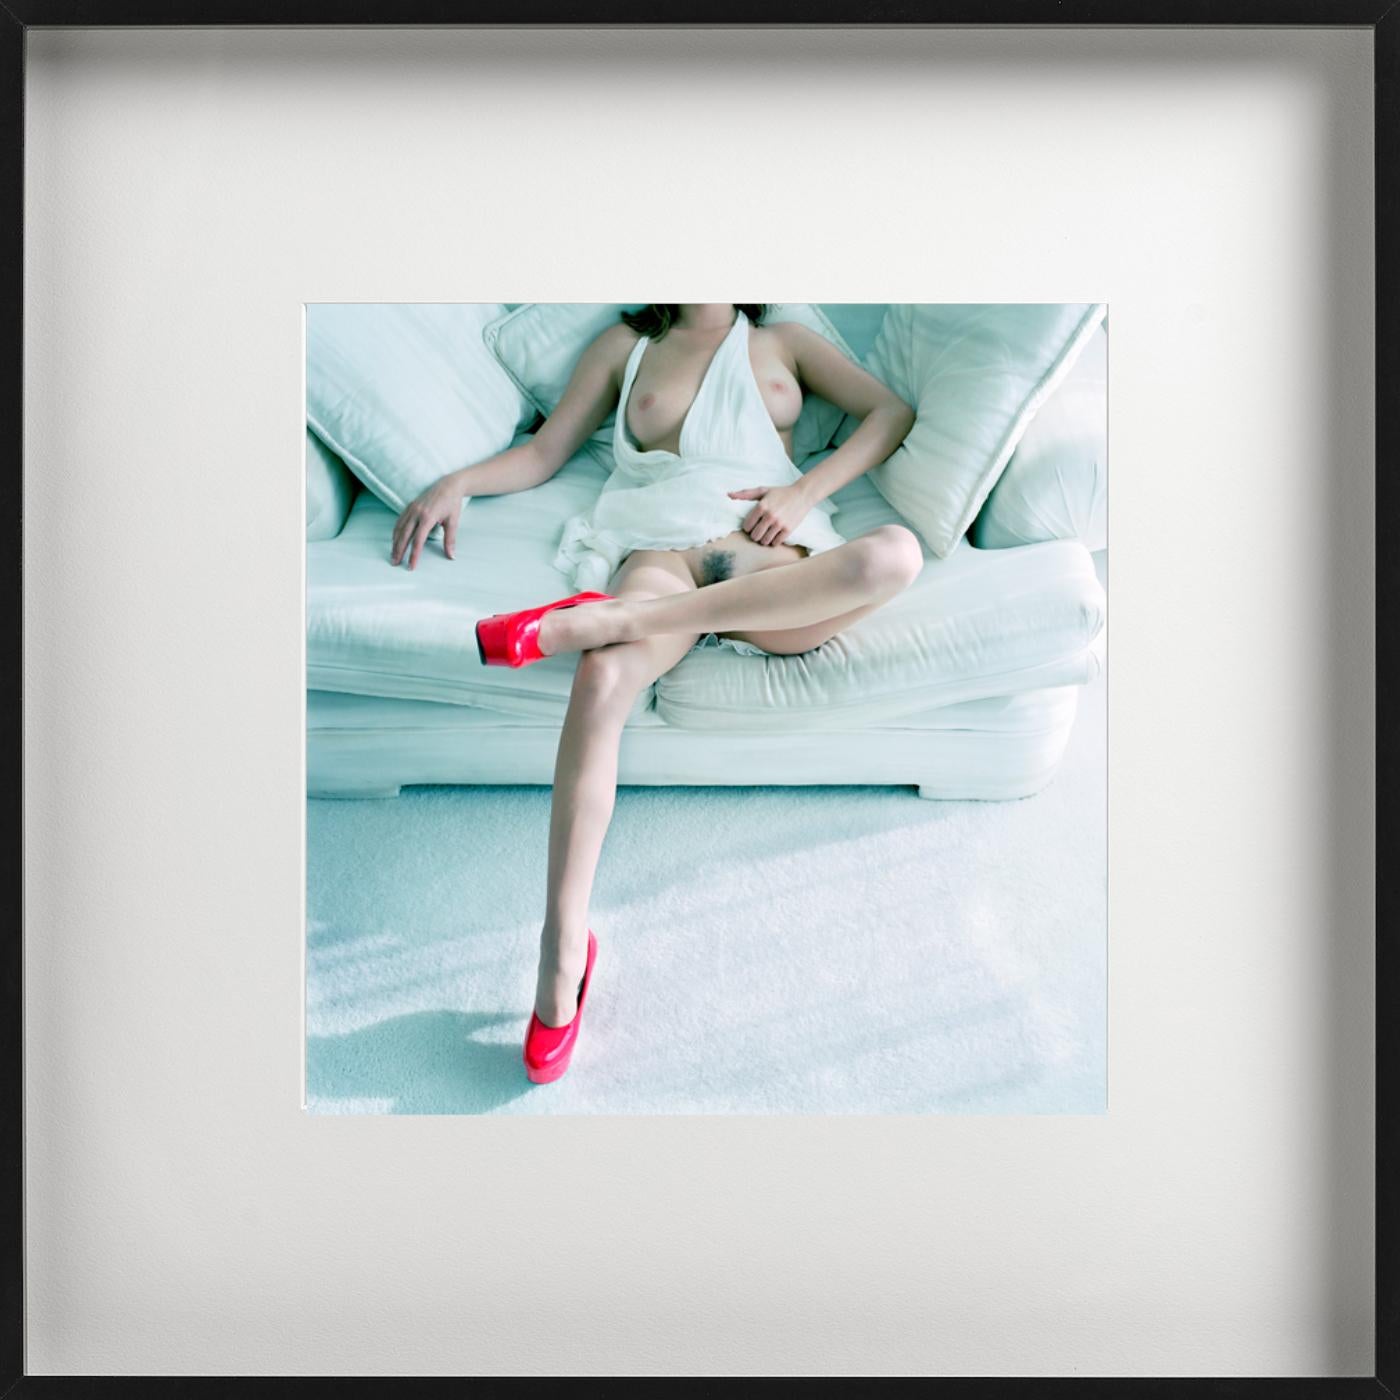 'A dream is dreaming of you' - seminude in pink shoes, fine art photography 2005 - Contemporary Photograph by Guido Argentini